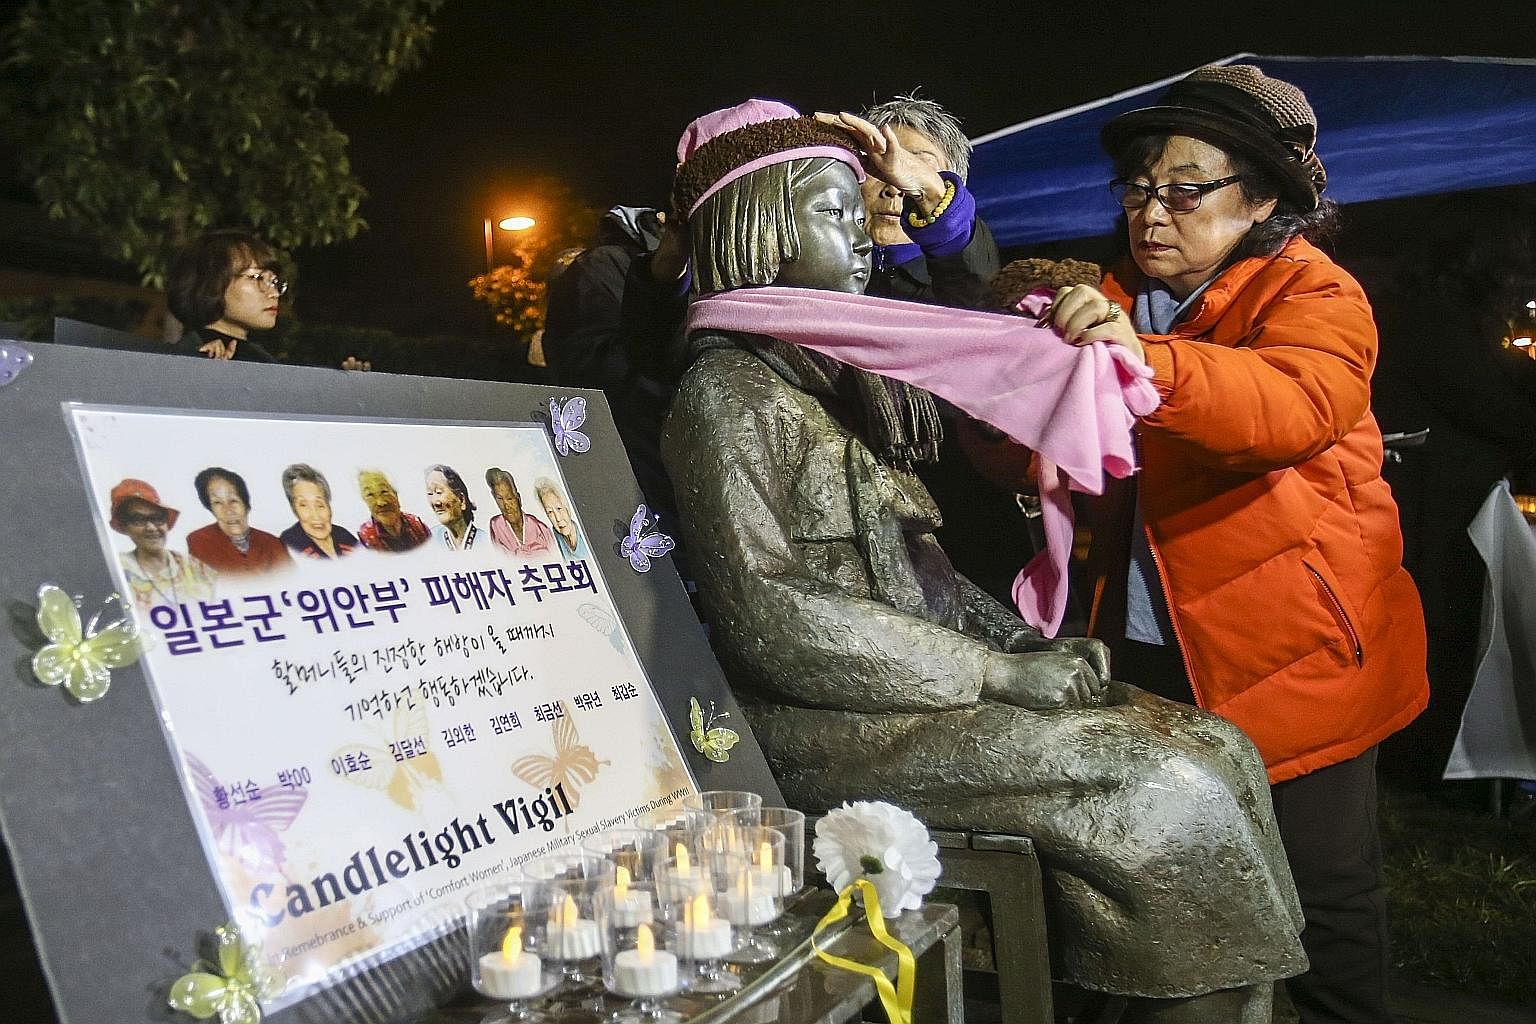 Supporters placing a scarf and a hat on a memorial statue honouring comfort women at Glendale Peace Monument in California during a candlelight vigil on Jan 5.